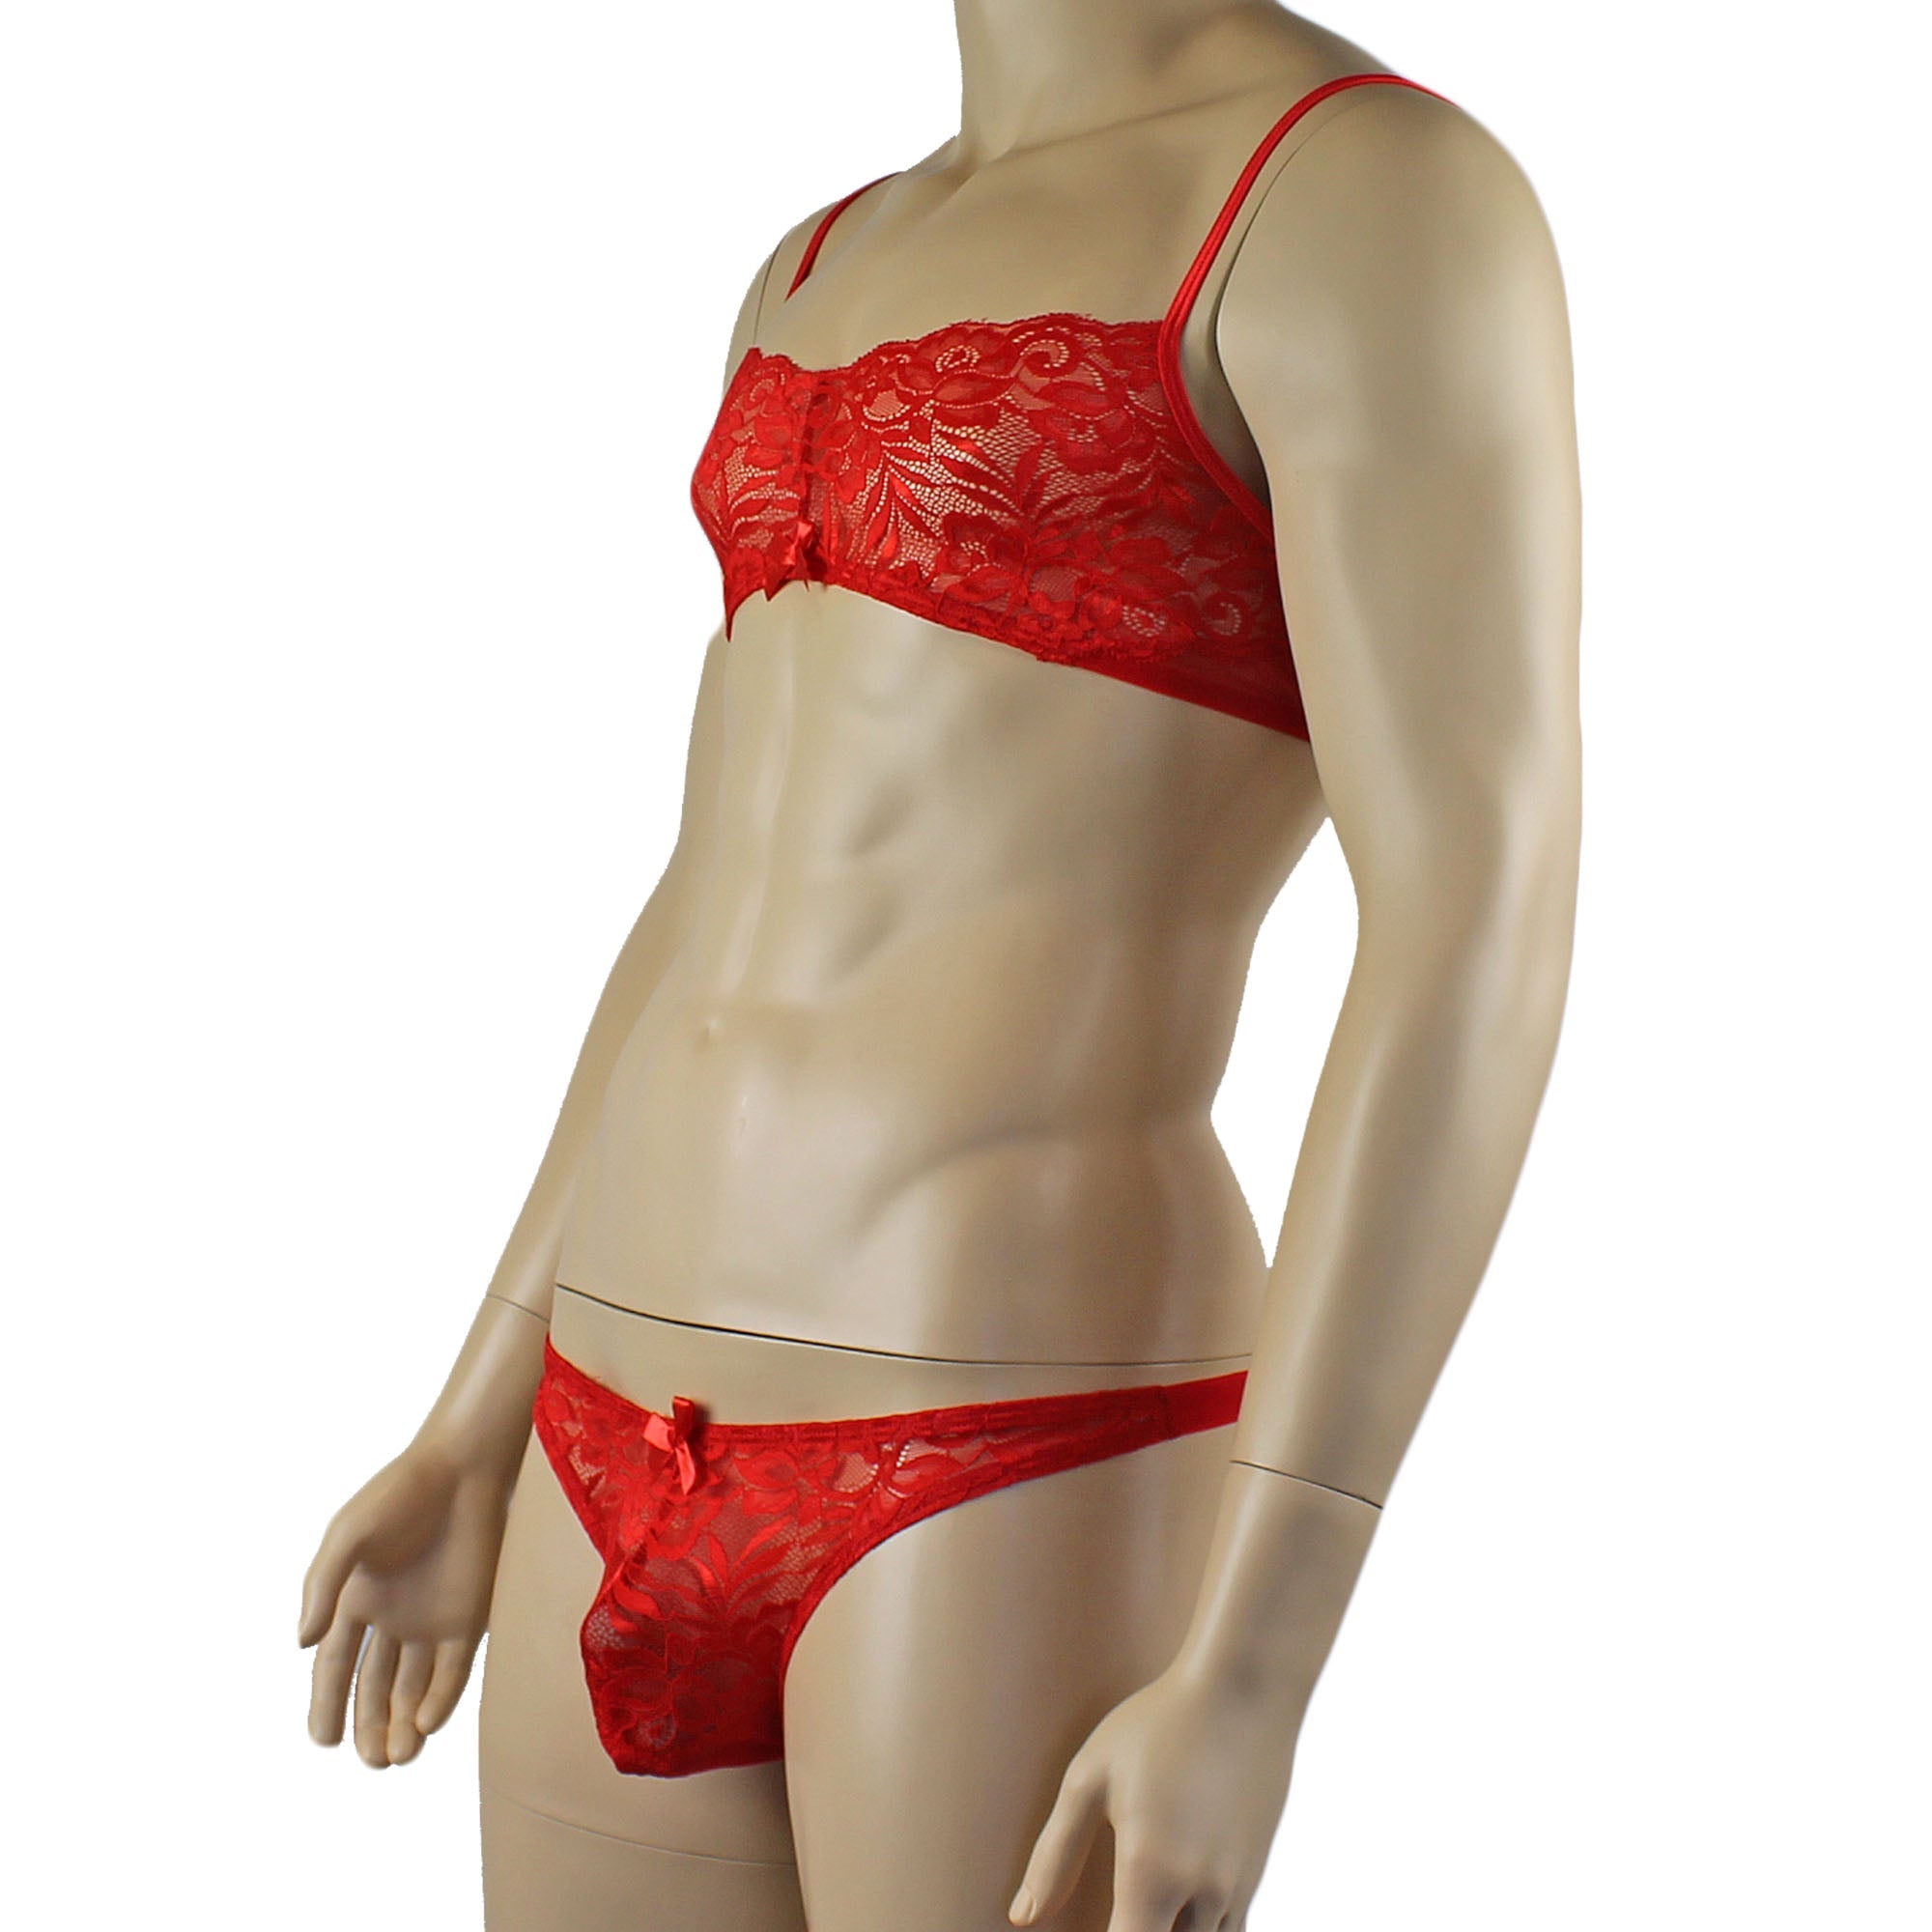 Mens Kristy Lace & Mesh Bra Top and Thong Panty Red